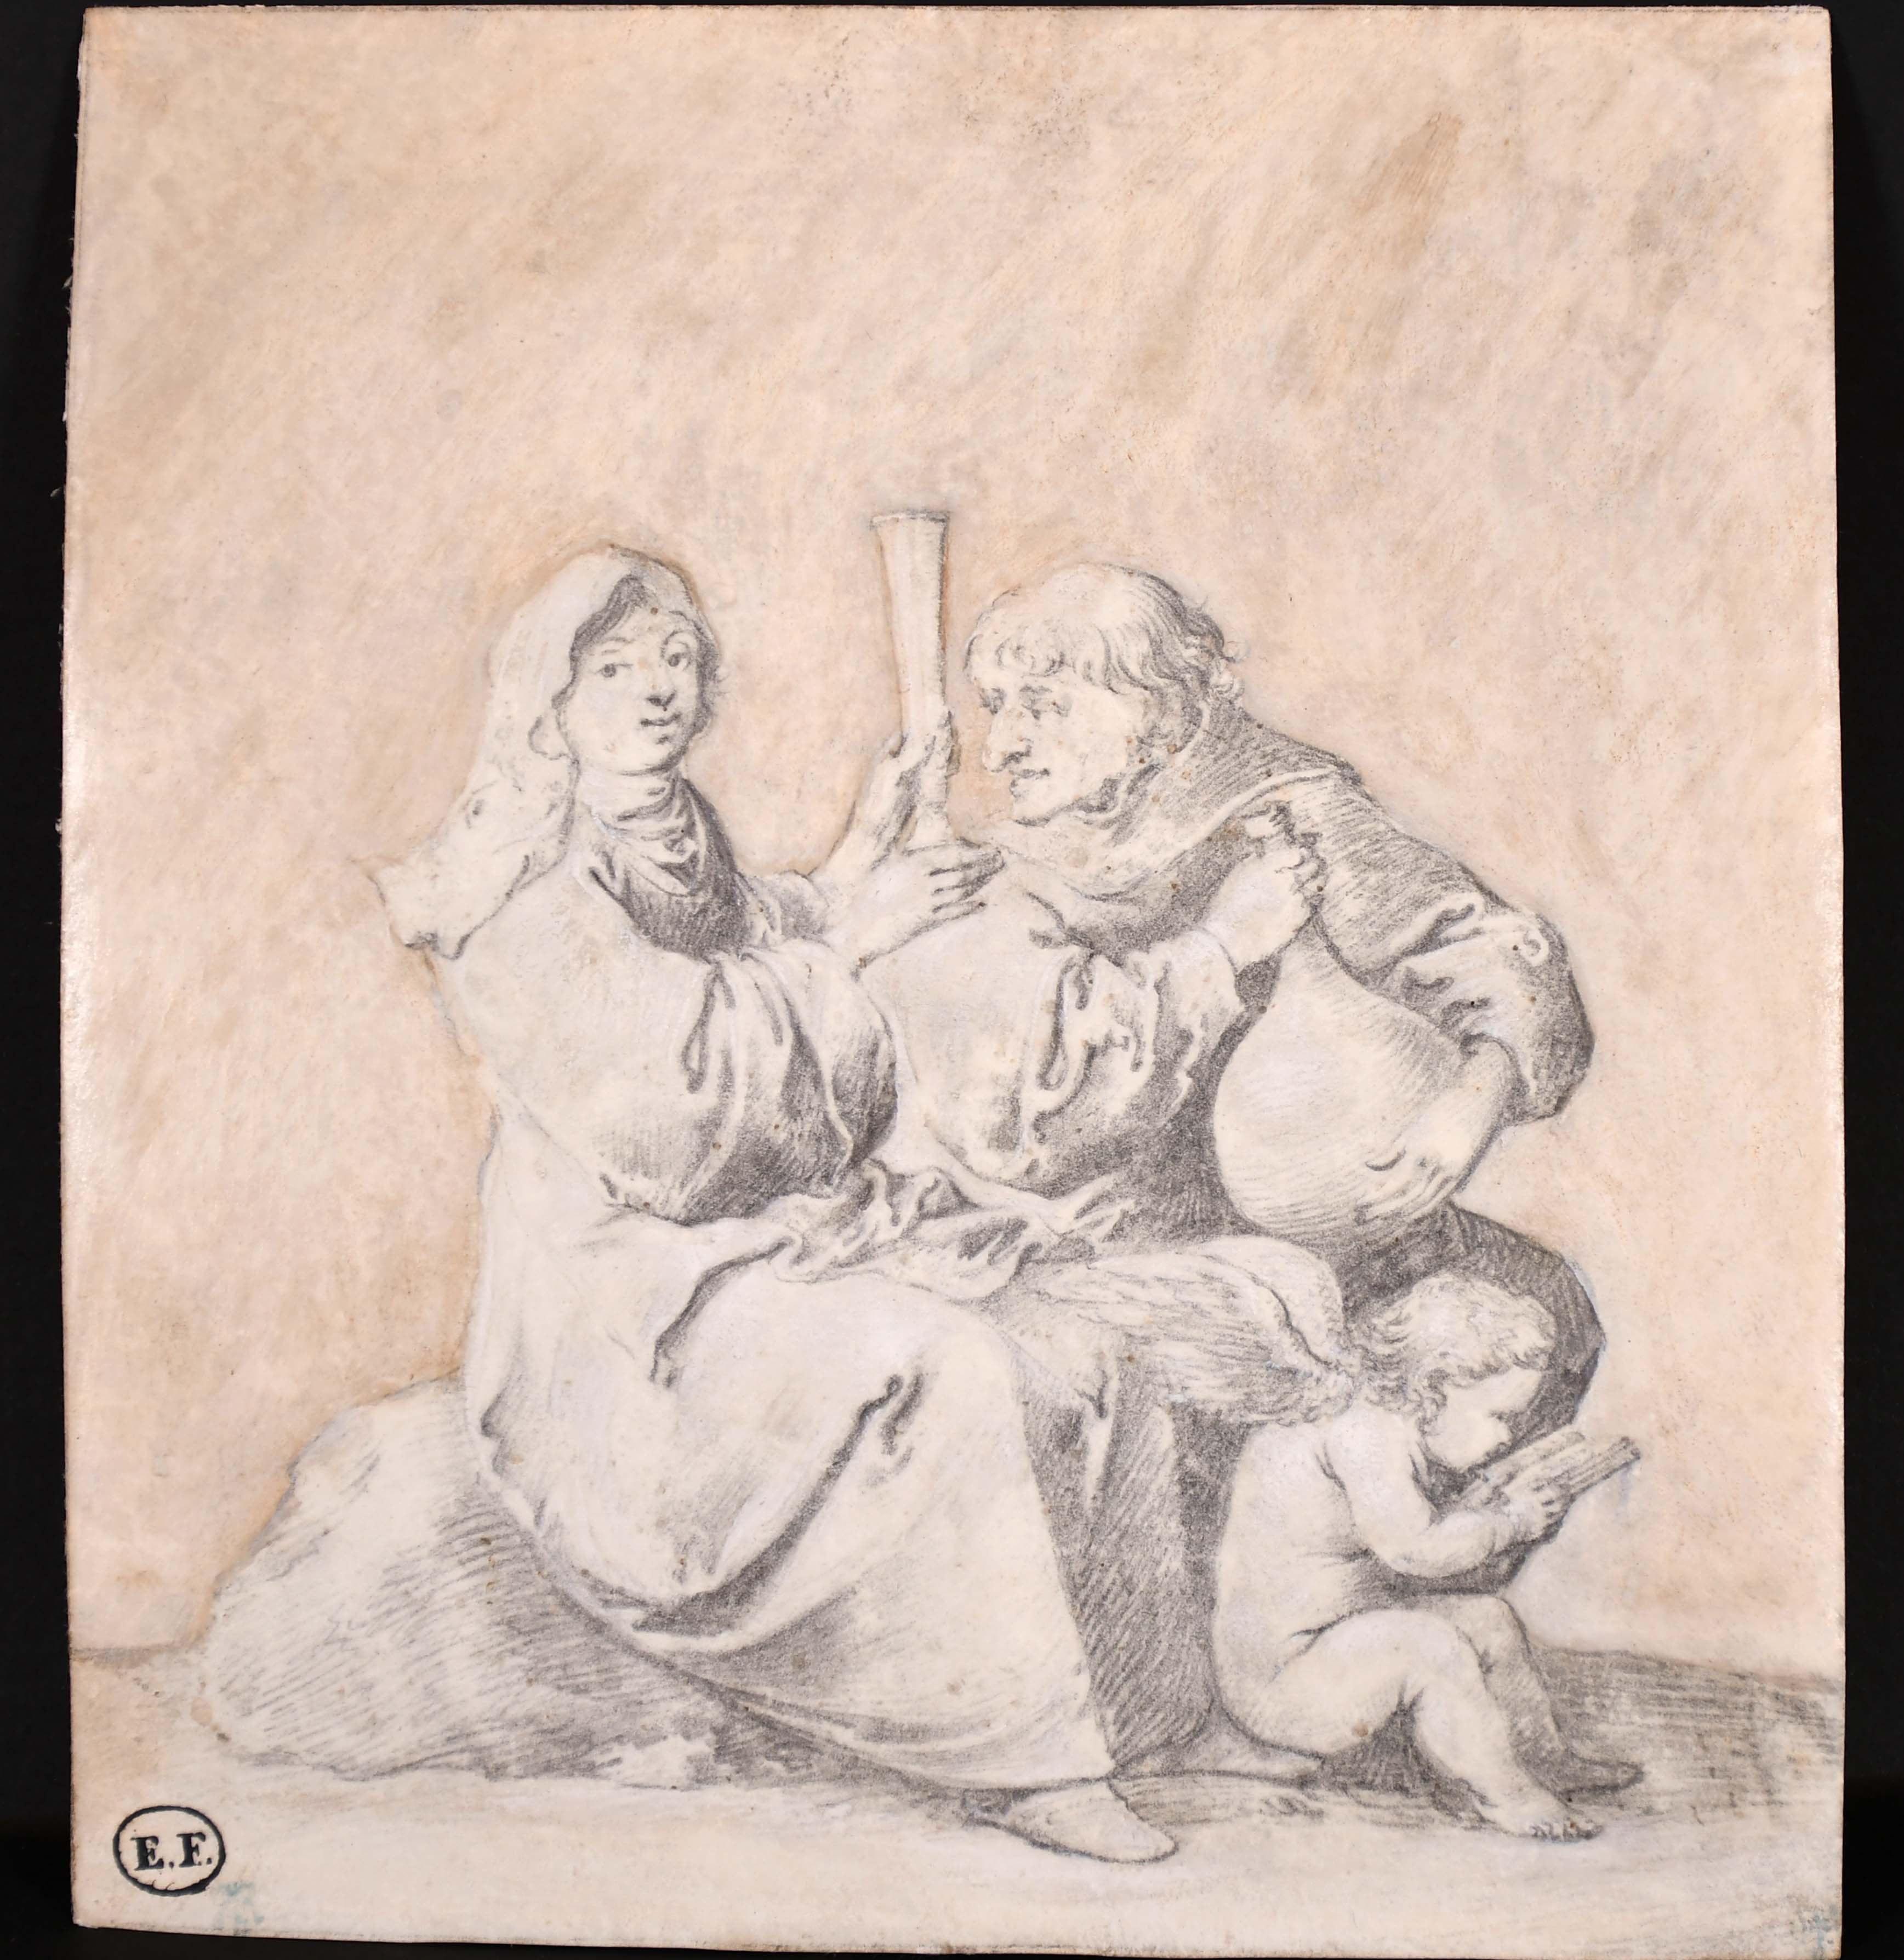 Attributed to Pieter Jansz. Quast (1606-1647) Dutch. Figures with Drinking Vessels, Pencil and - Image 2 of 4